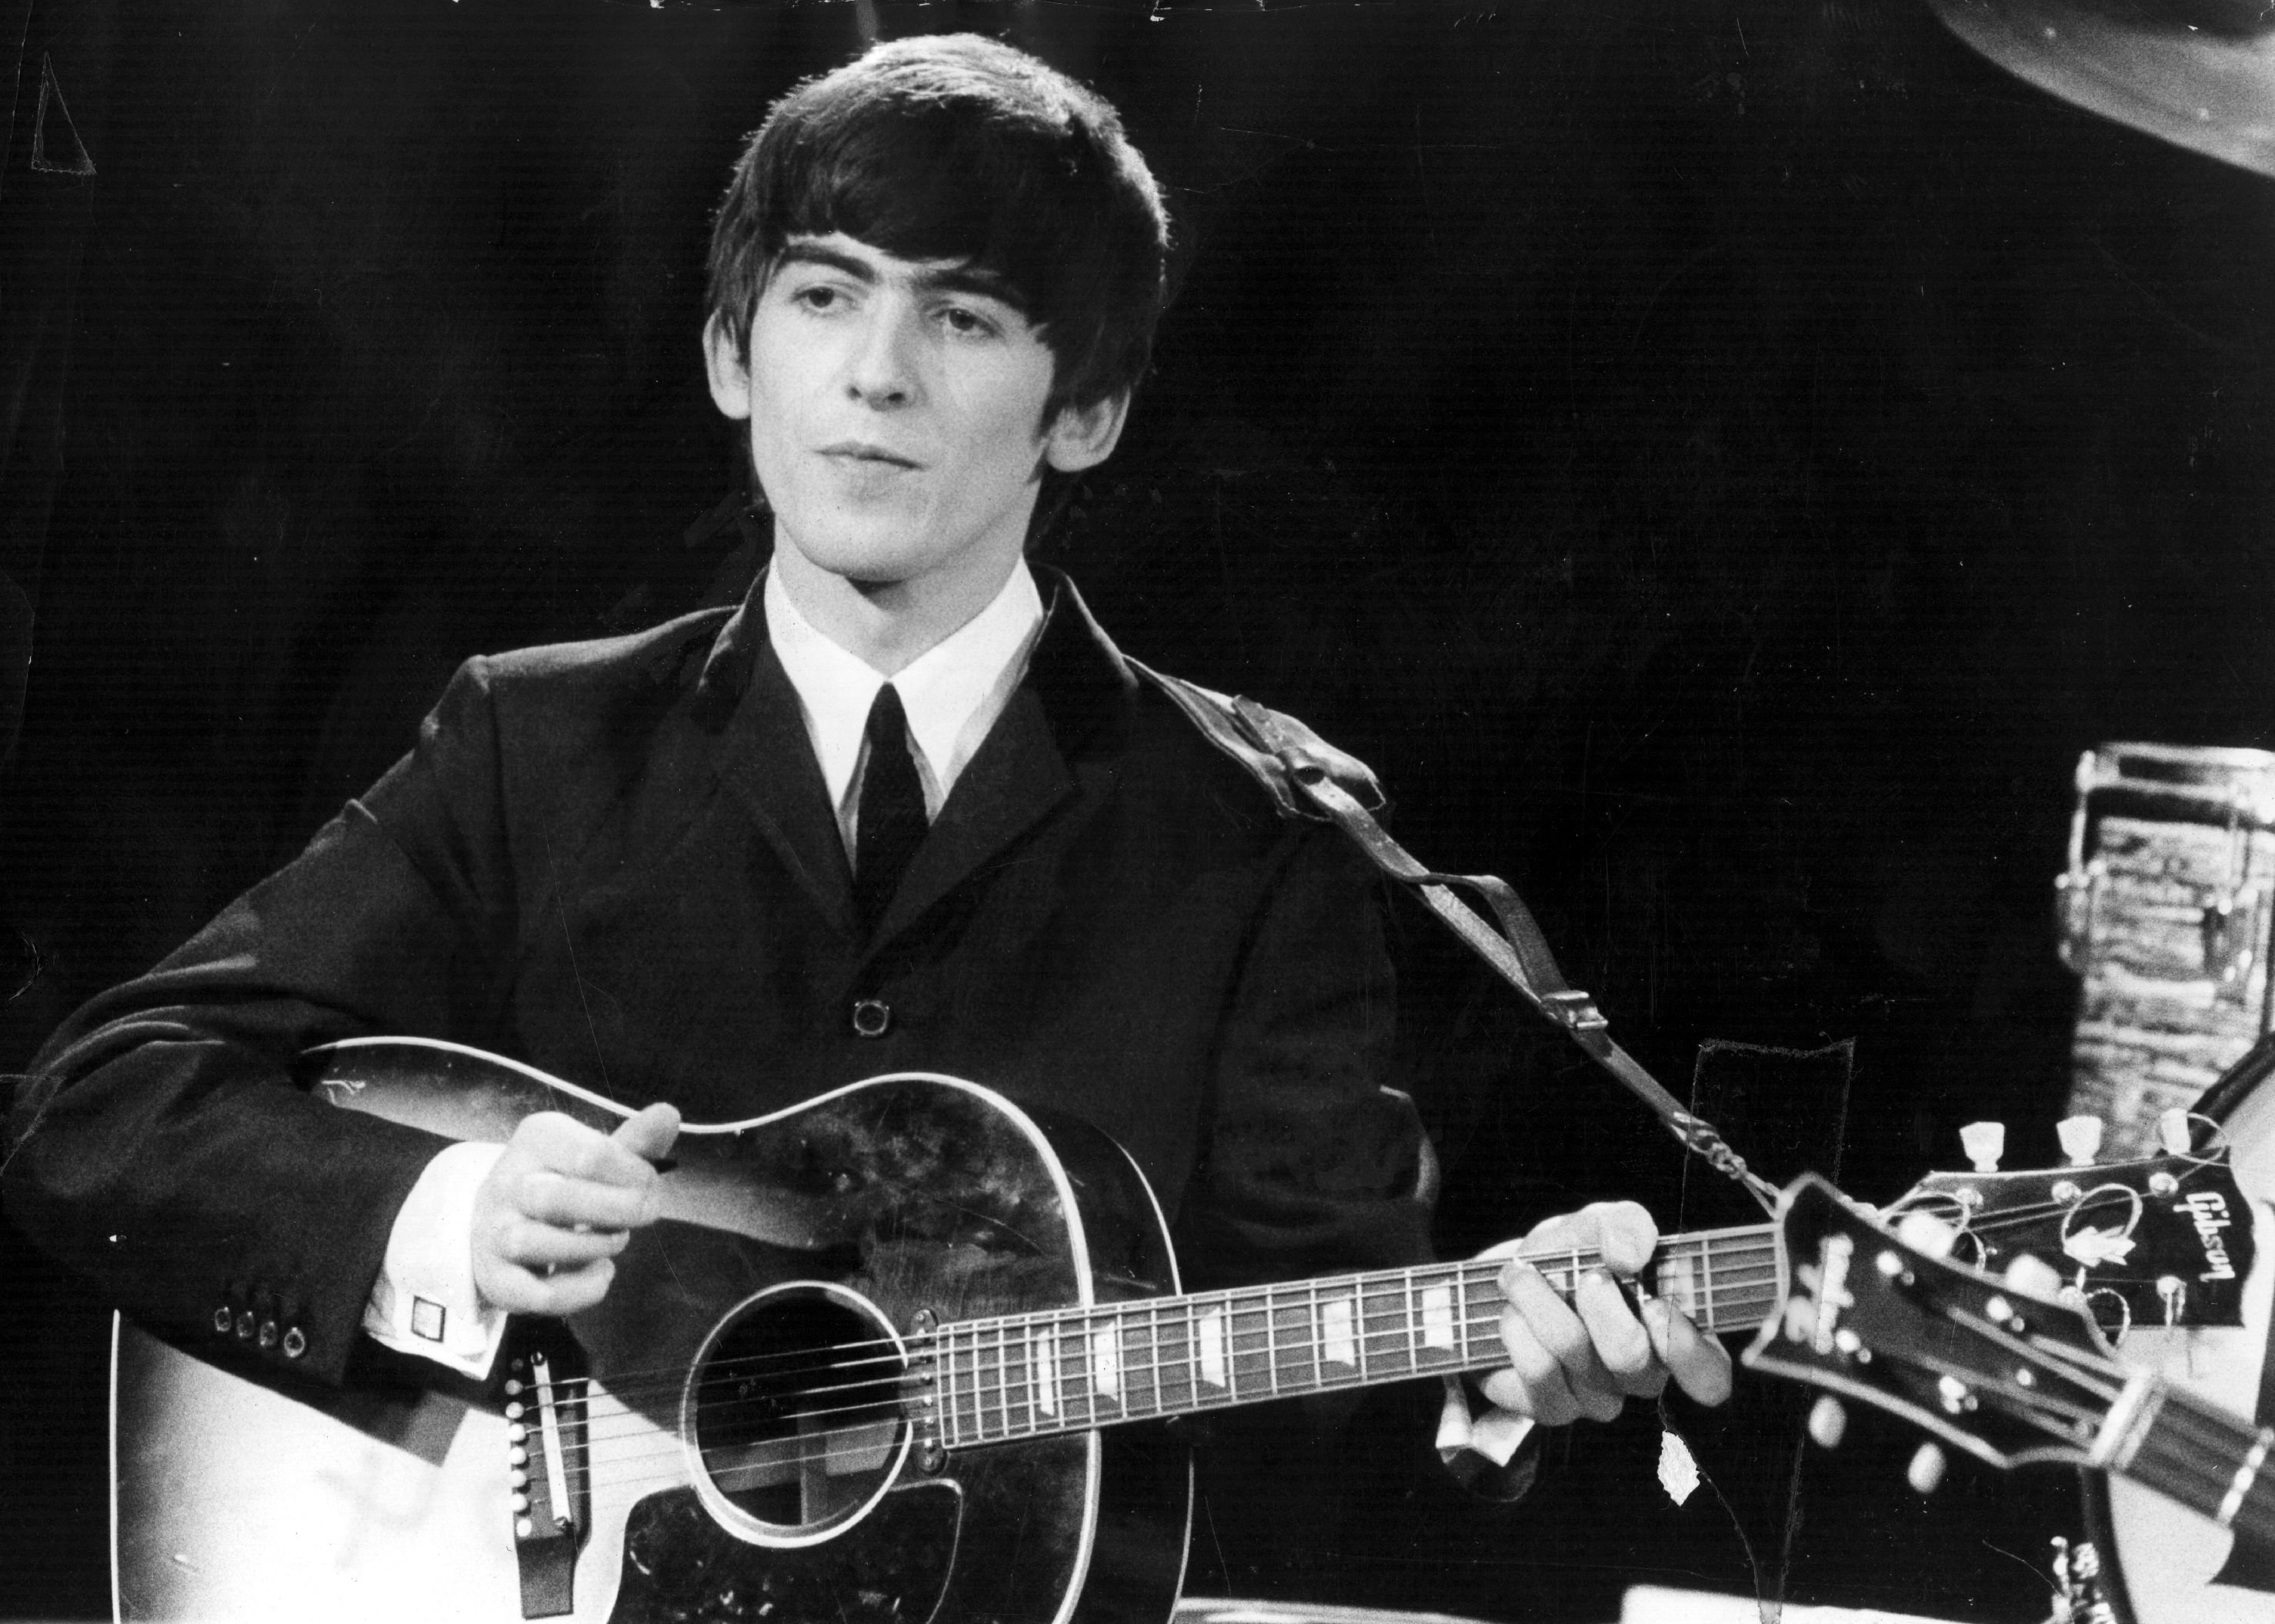 A black and white photo of George Harrison holding a guitar.